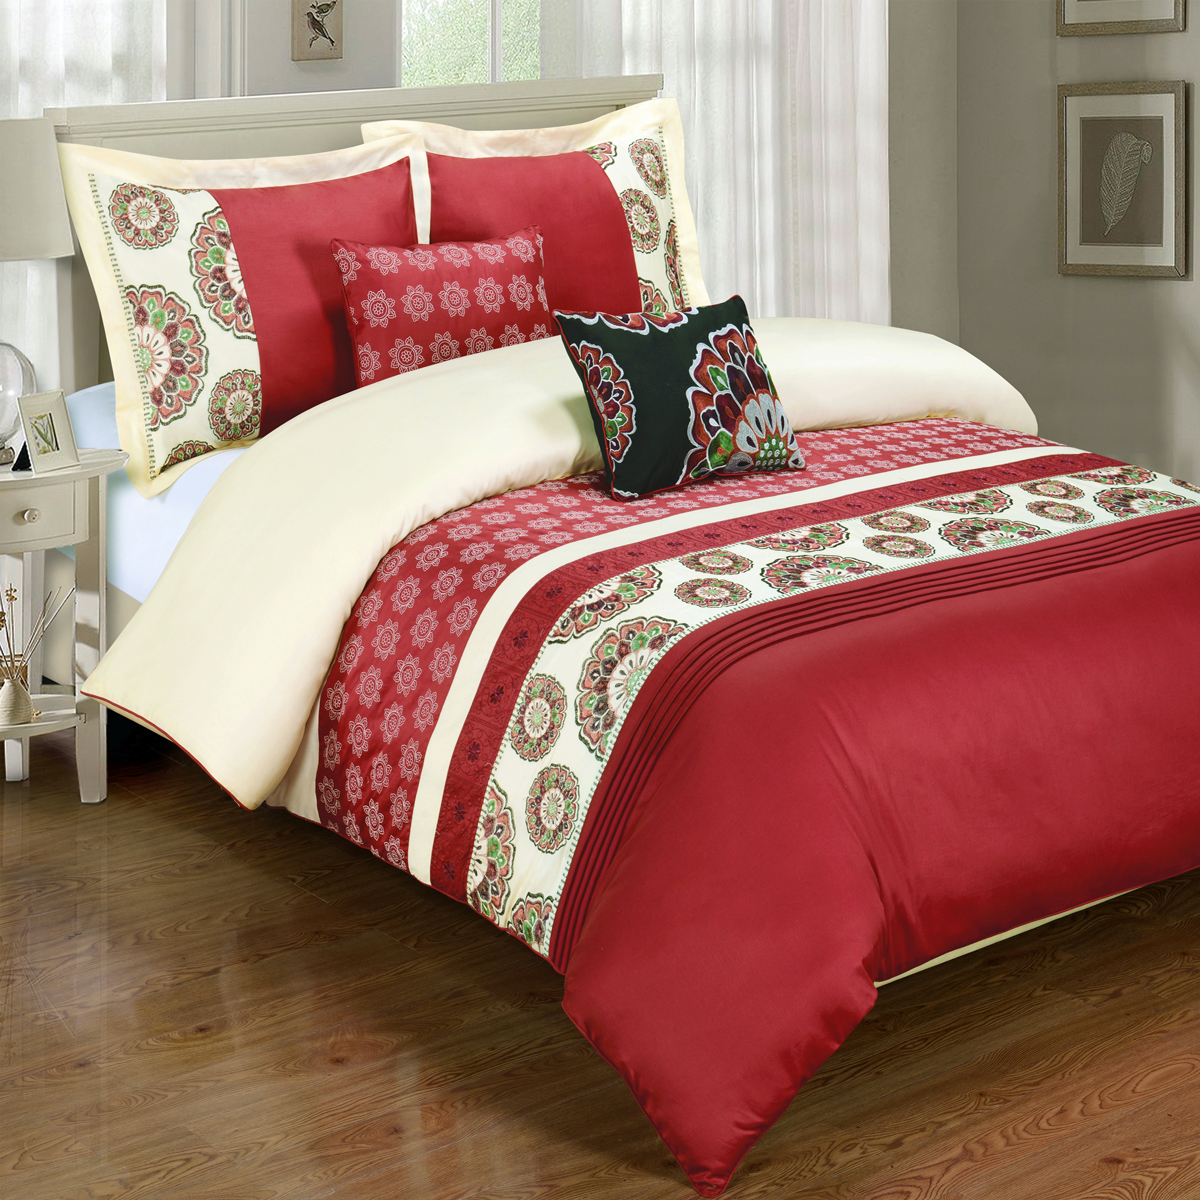 GoLinens Luxury 100% Cotton 5 Piece Red Embroidered Duvet Cover Set with Pillow Shams